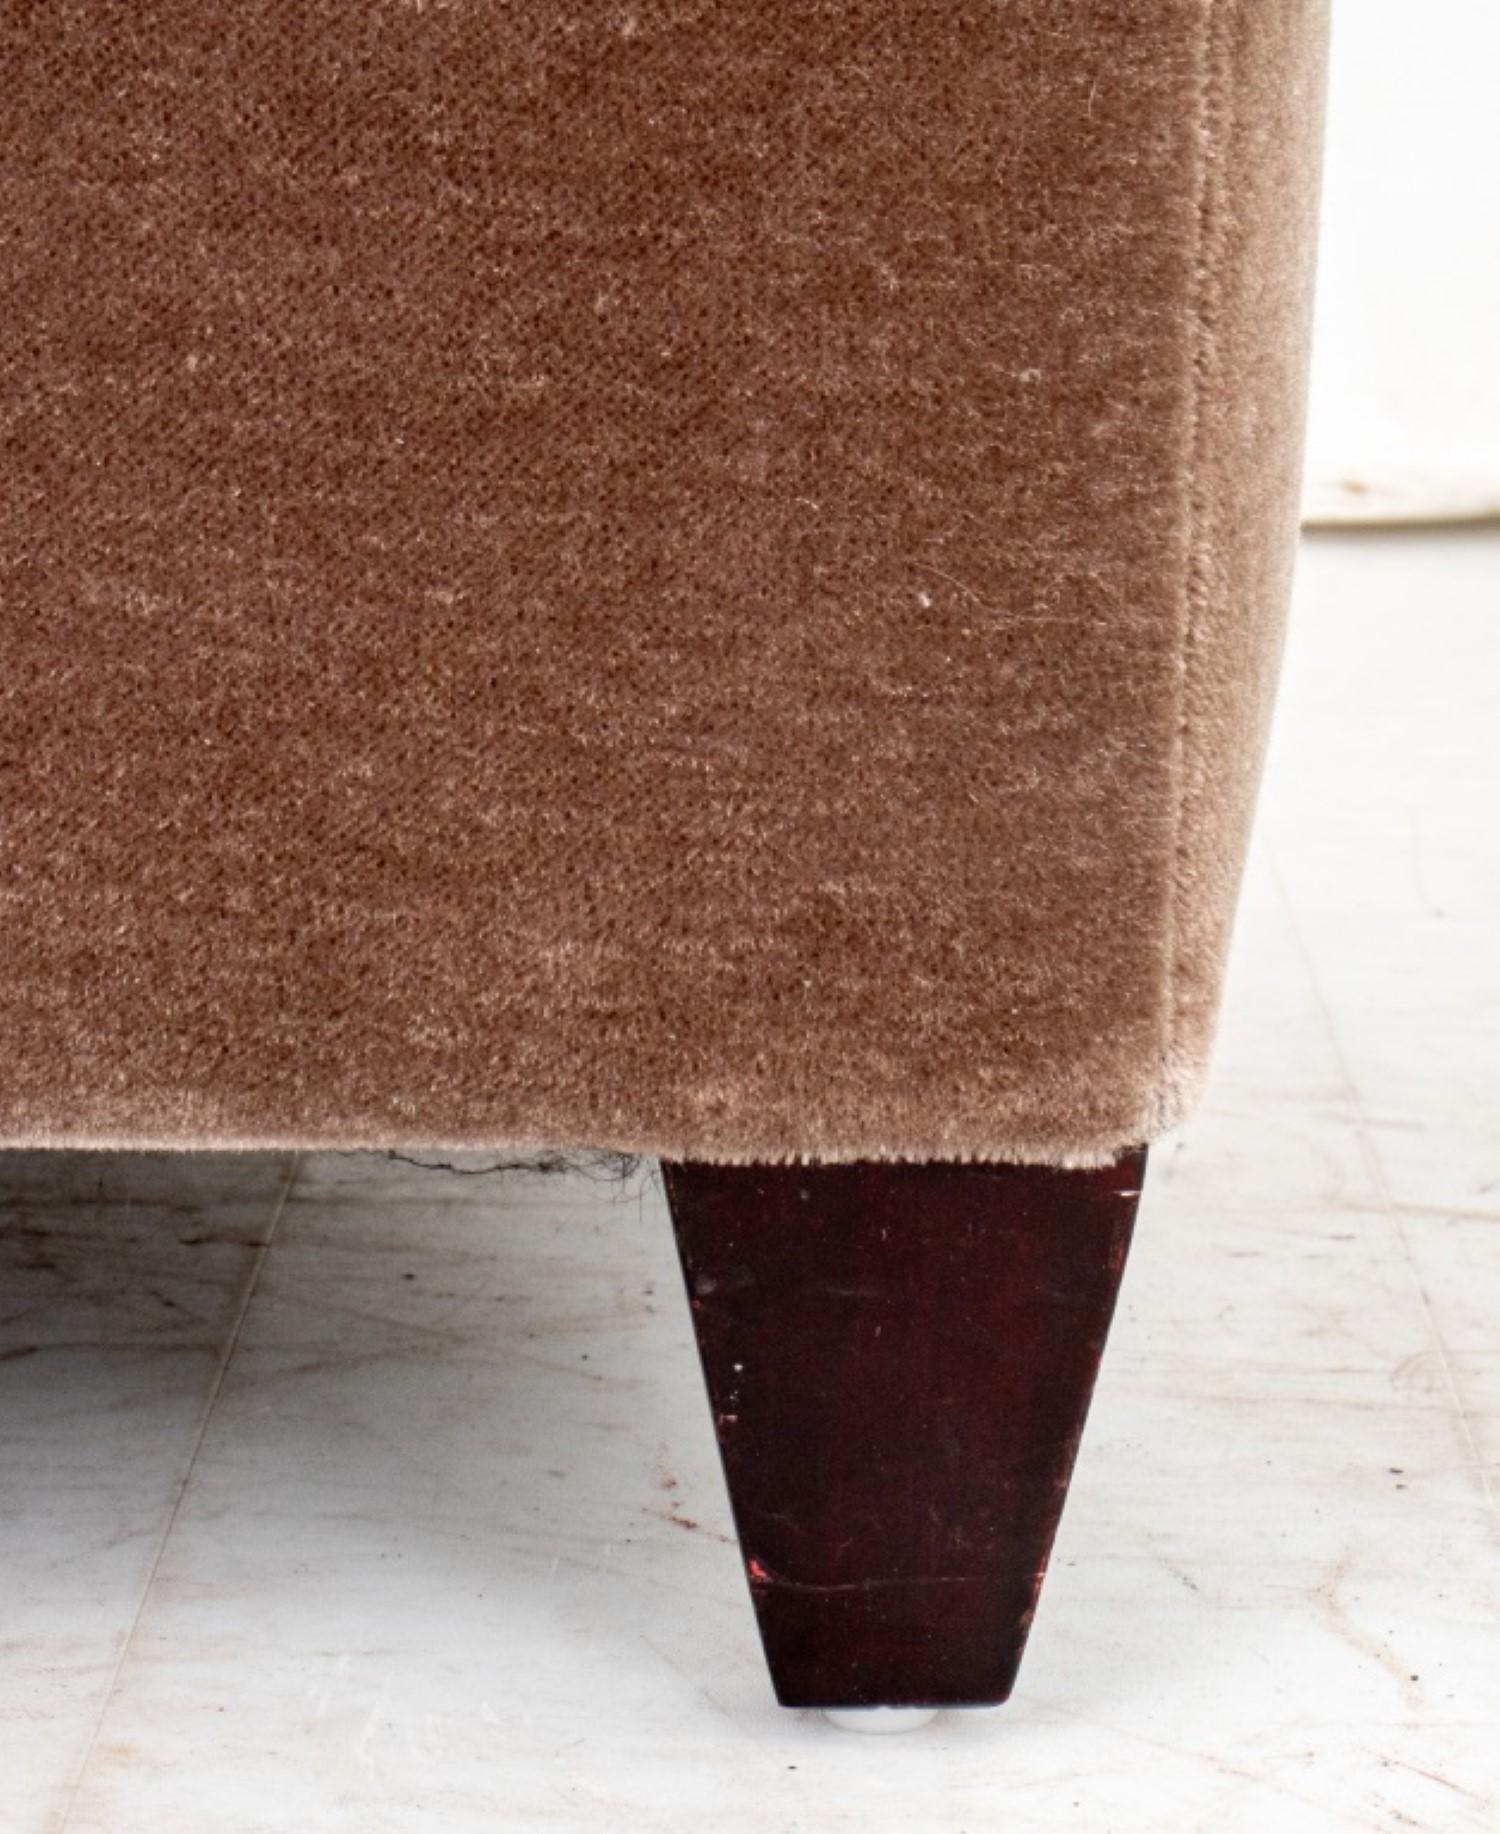 Sophisticated John Hutton for Donghia Ultrasuede Footstool

Add a touch of timeless elegance to your living space with this luxurious footstool, designed by renowned furniture designer John Hutton for Donghia. Crafted from sumptuous Ultrasuede